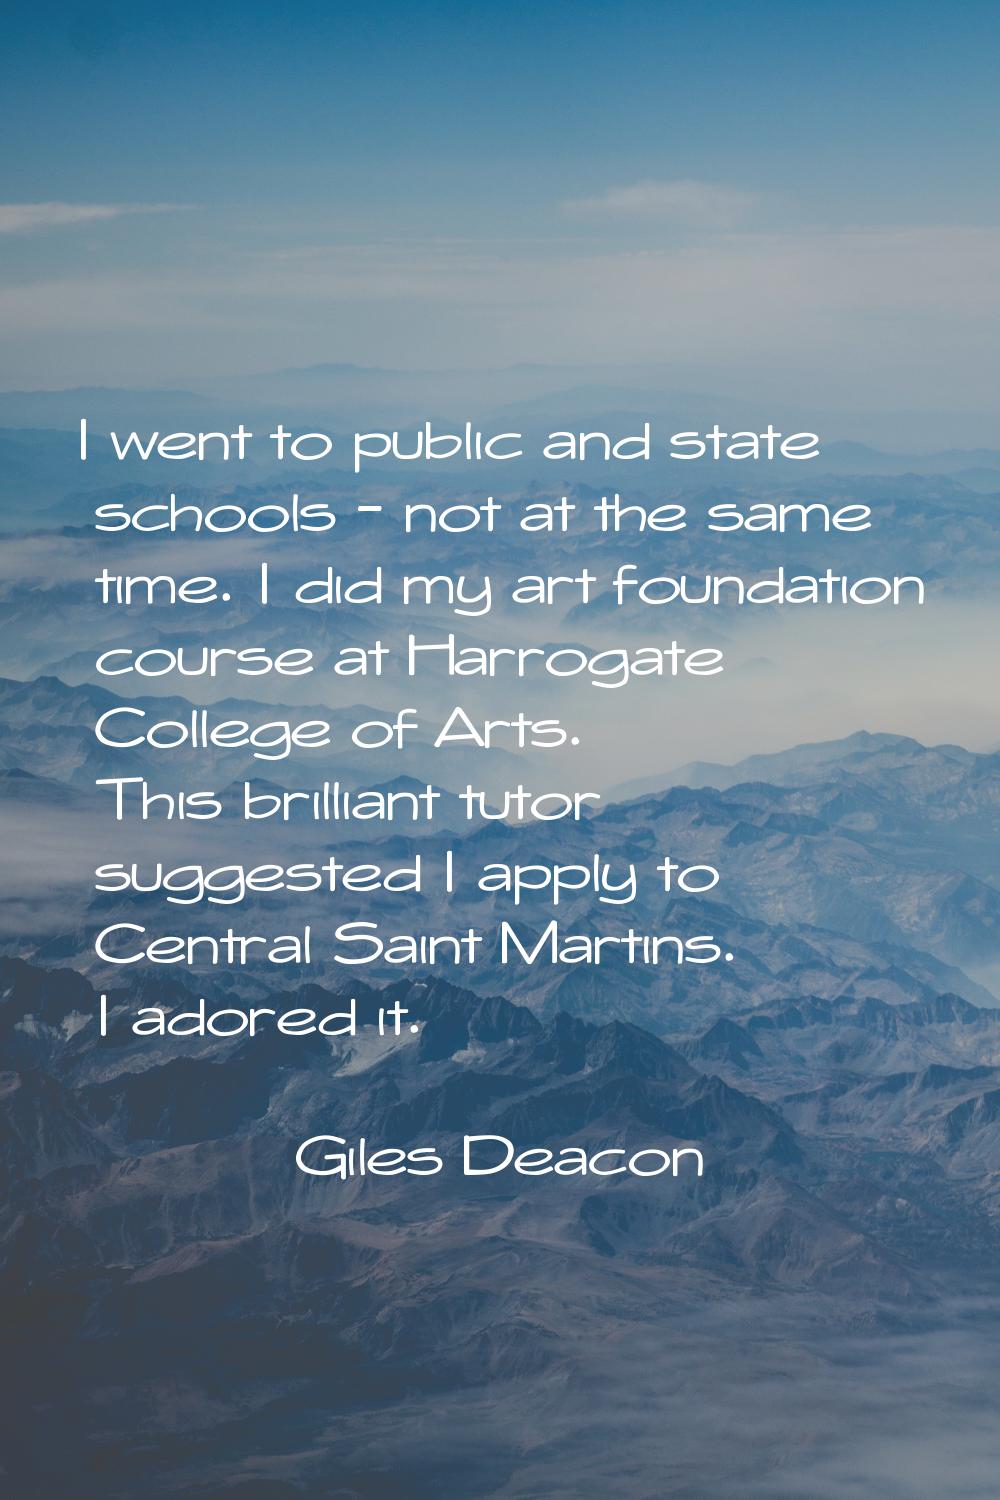 I went to public and state schools - not at the same time. I did my art foundation course at Harrog